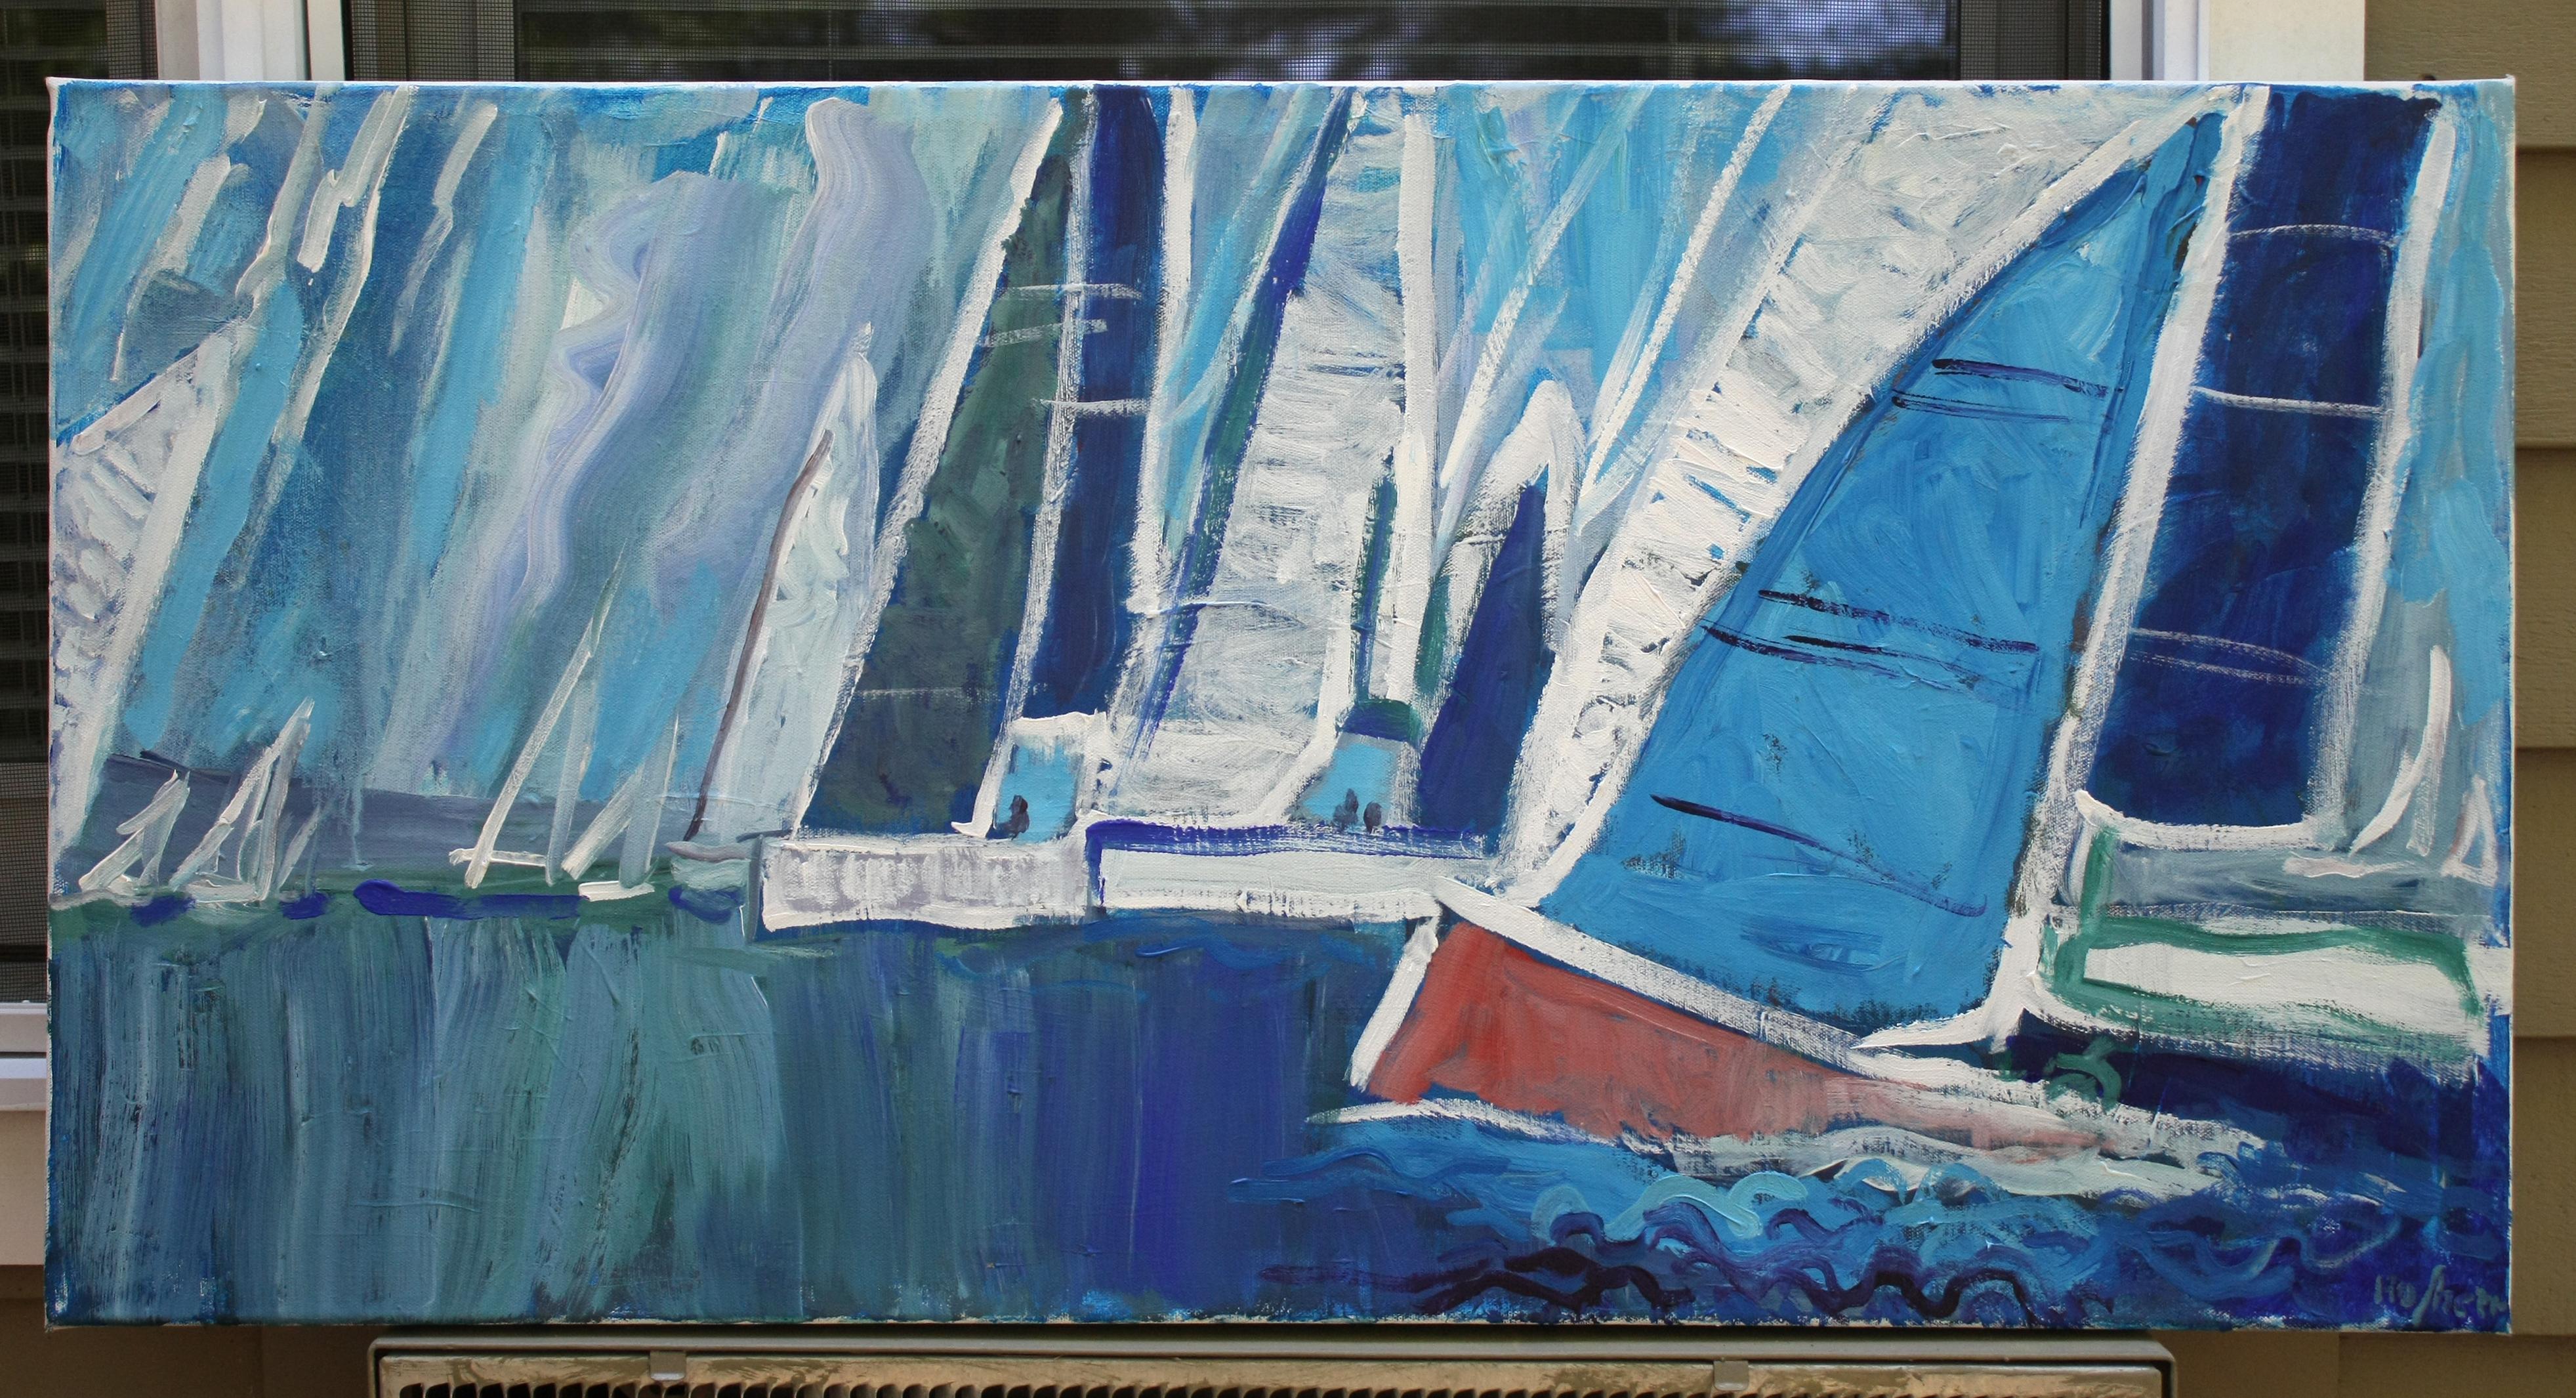 <p>Artist Comments<br>Artist Robert Hofherr presents an expressionist image of competitive sailing boats on a simplified seascape. 